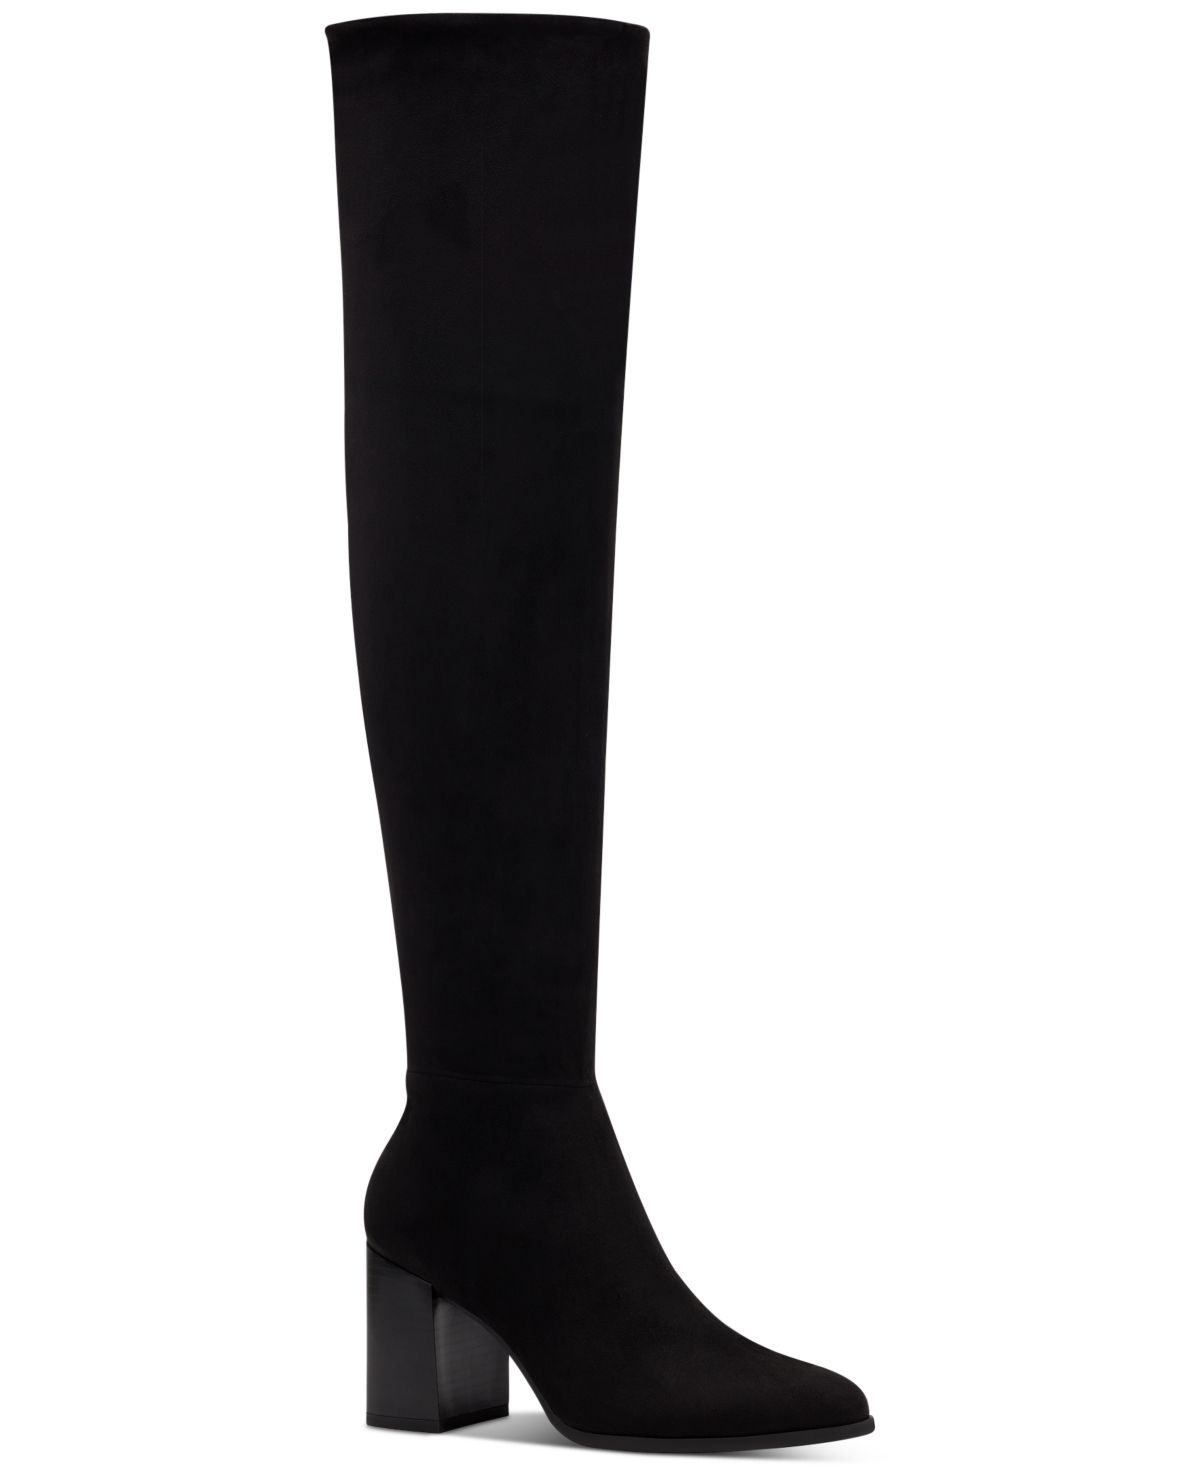 Inc International Concepts Windee Over-The-Knee Boots, Created for Macy's Women's Shoes | Macys (US)